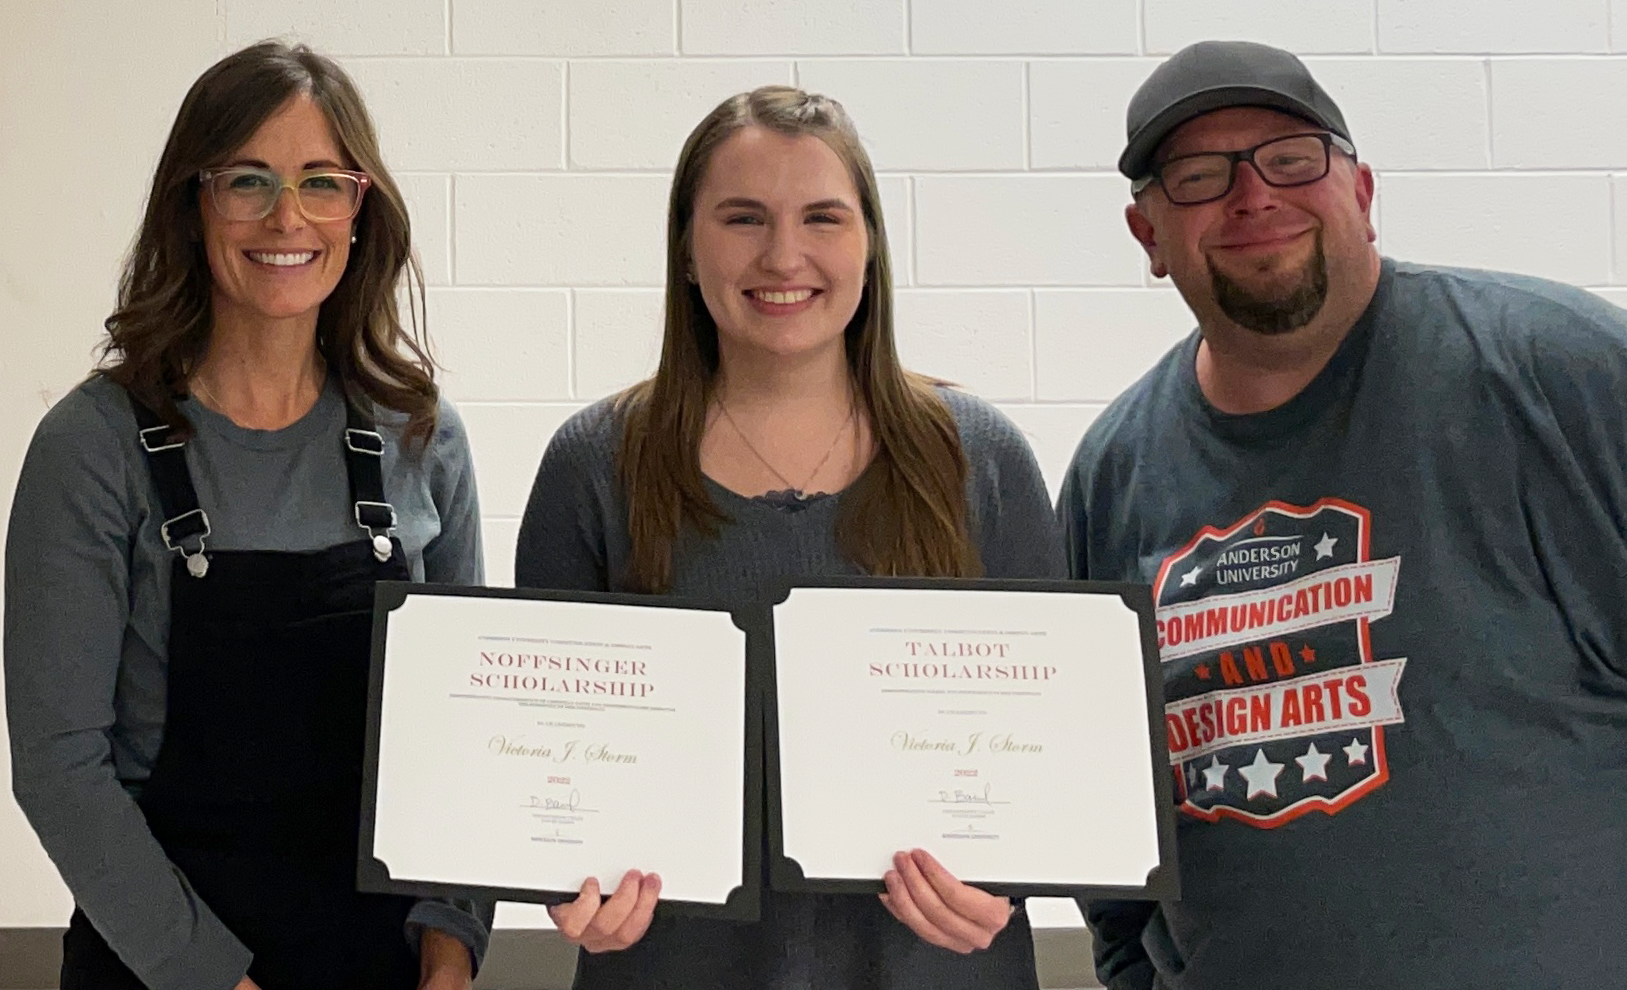 Tori Storm holding the Talbott and Noffsinger scholarships with professors Holly Sims and Jason Higgs